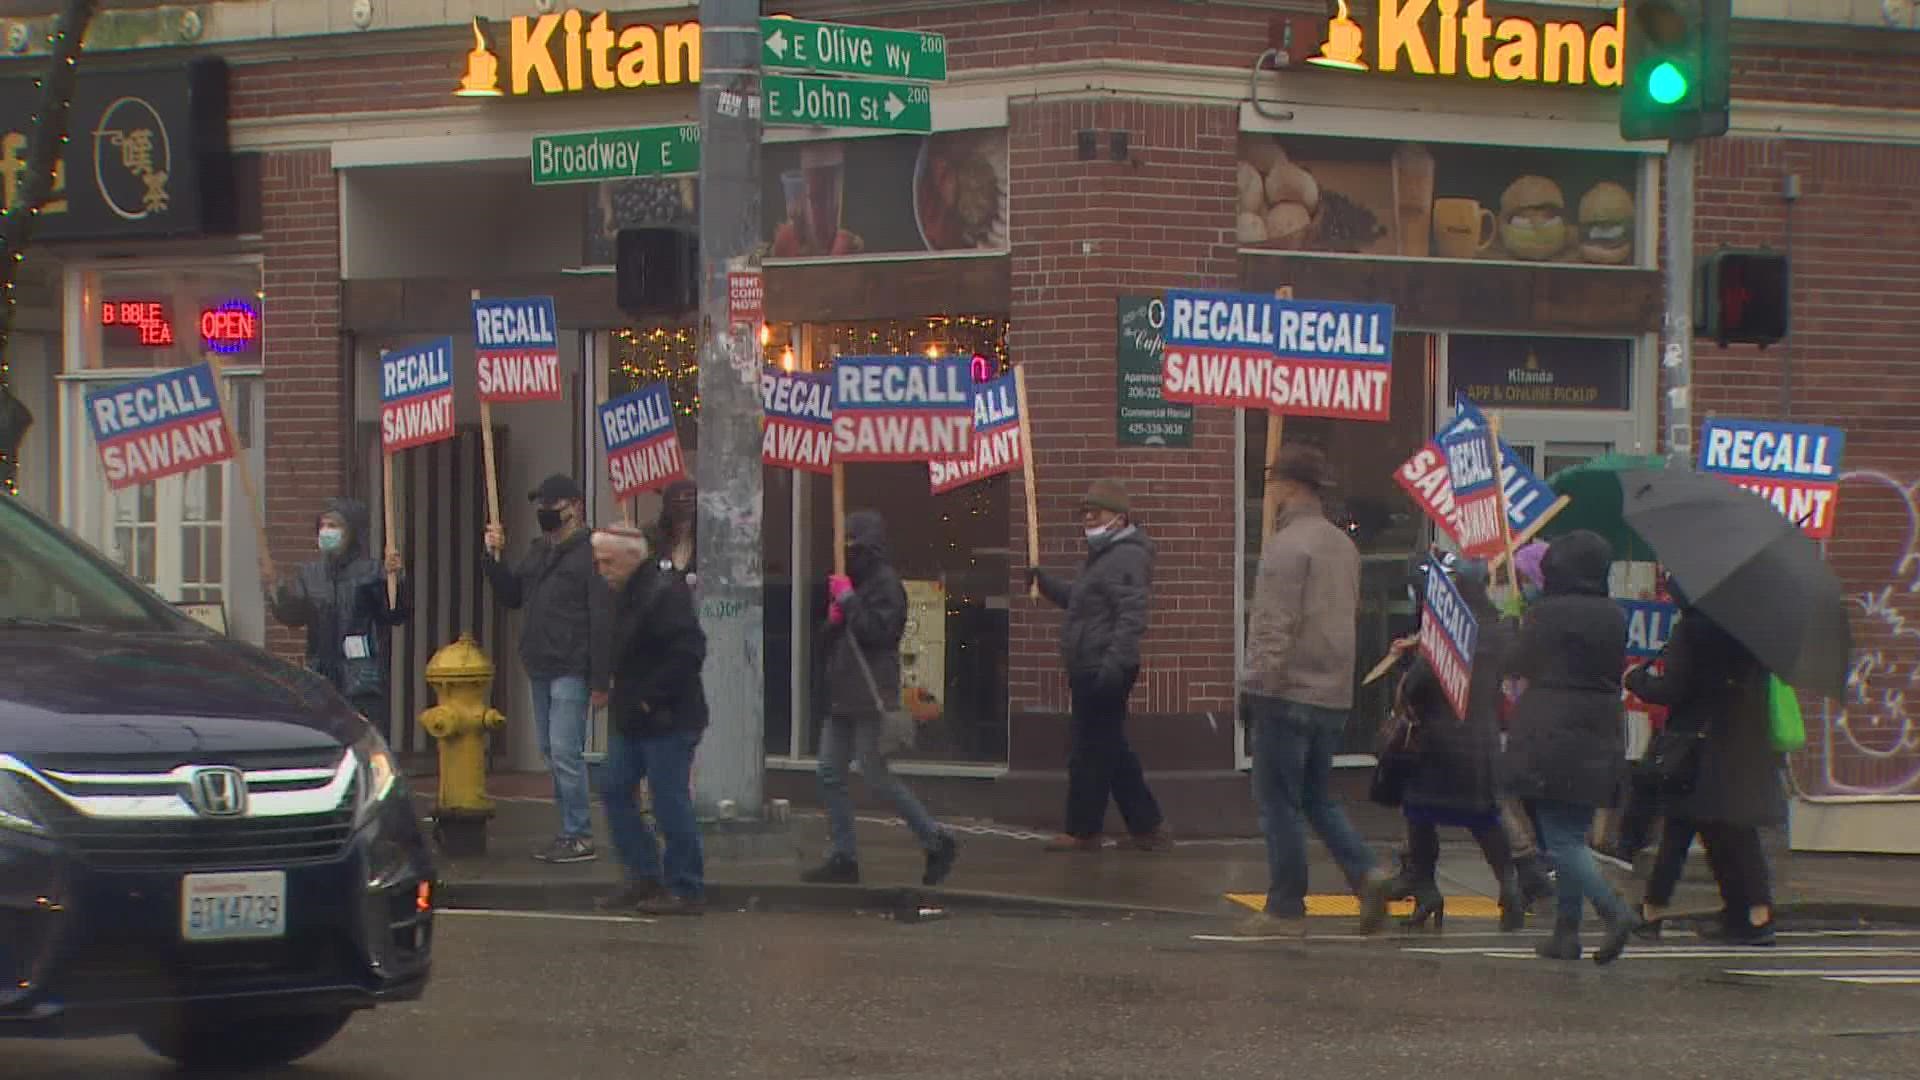 Supporters of council member Kshama Sawant and organizers of the recall campaign against her were out talking to potential voters on Saturday.